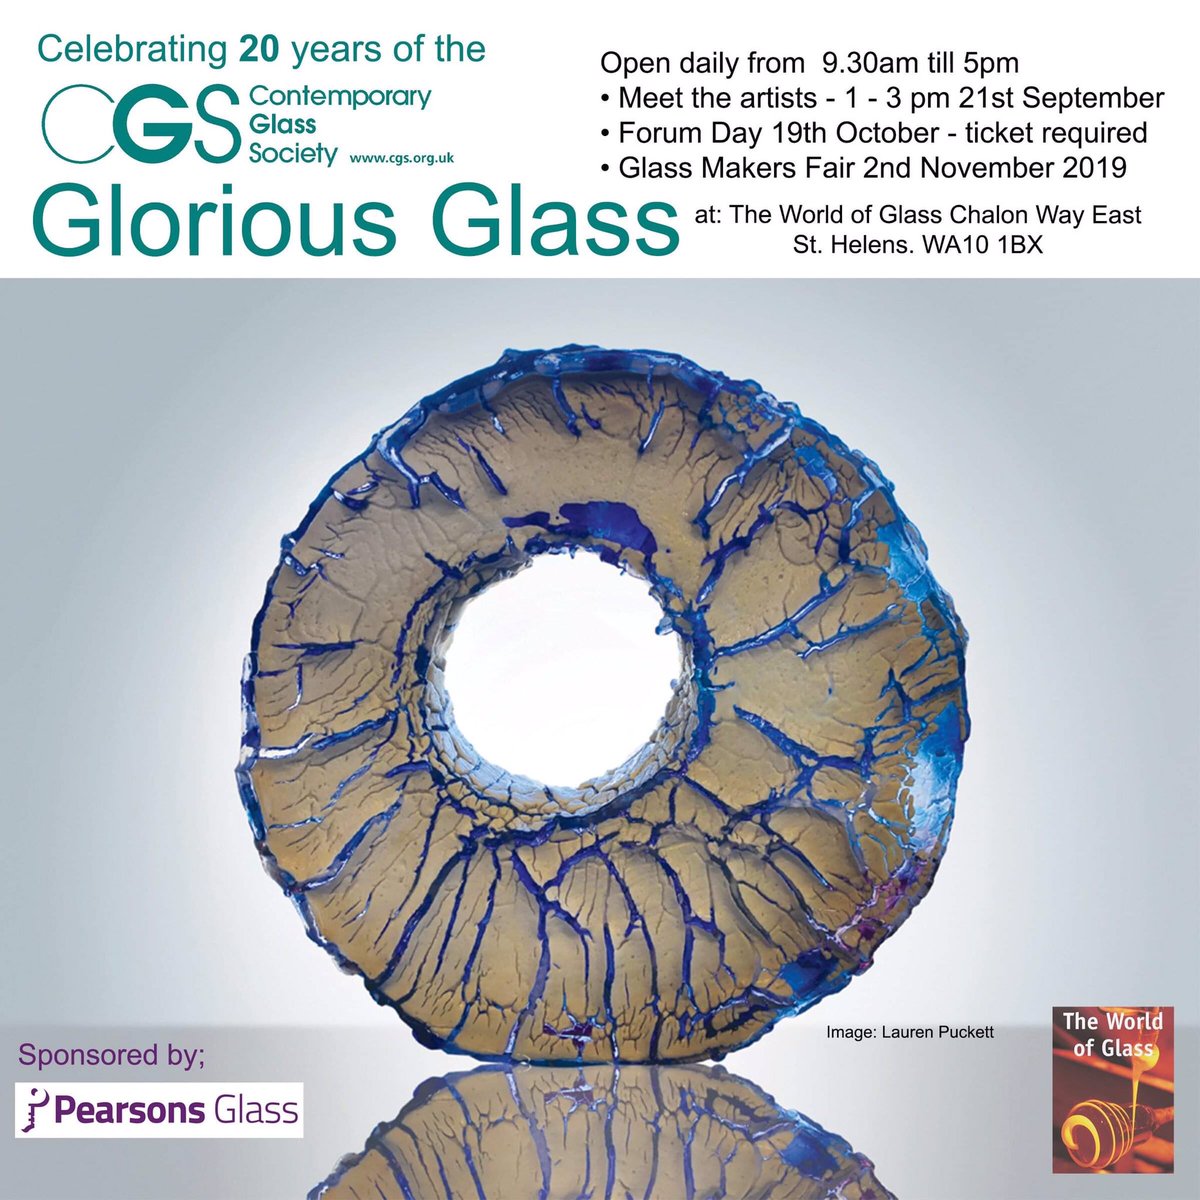 @CGSUK celebrating 20 years with the G L O R I O U S G L A S S Exhibition @TheWorldofGlass St.Helens Meet the artists 21st September 1- 3pm. #glass #celebration #meetthemakers #meettheartists #unique #contemporaryglasssociety #twentyyears